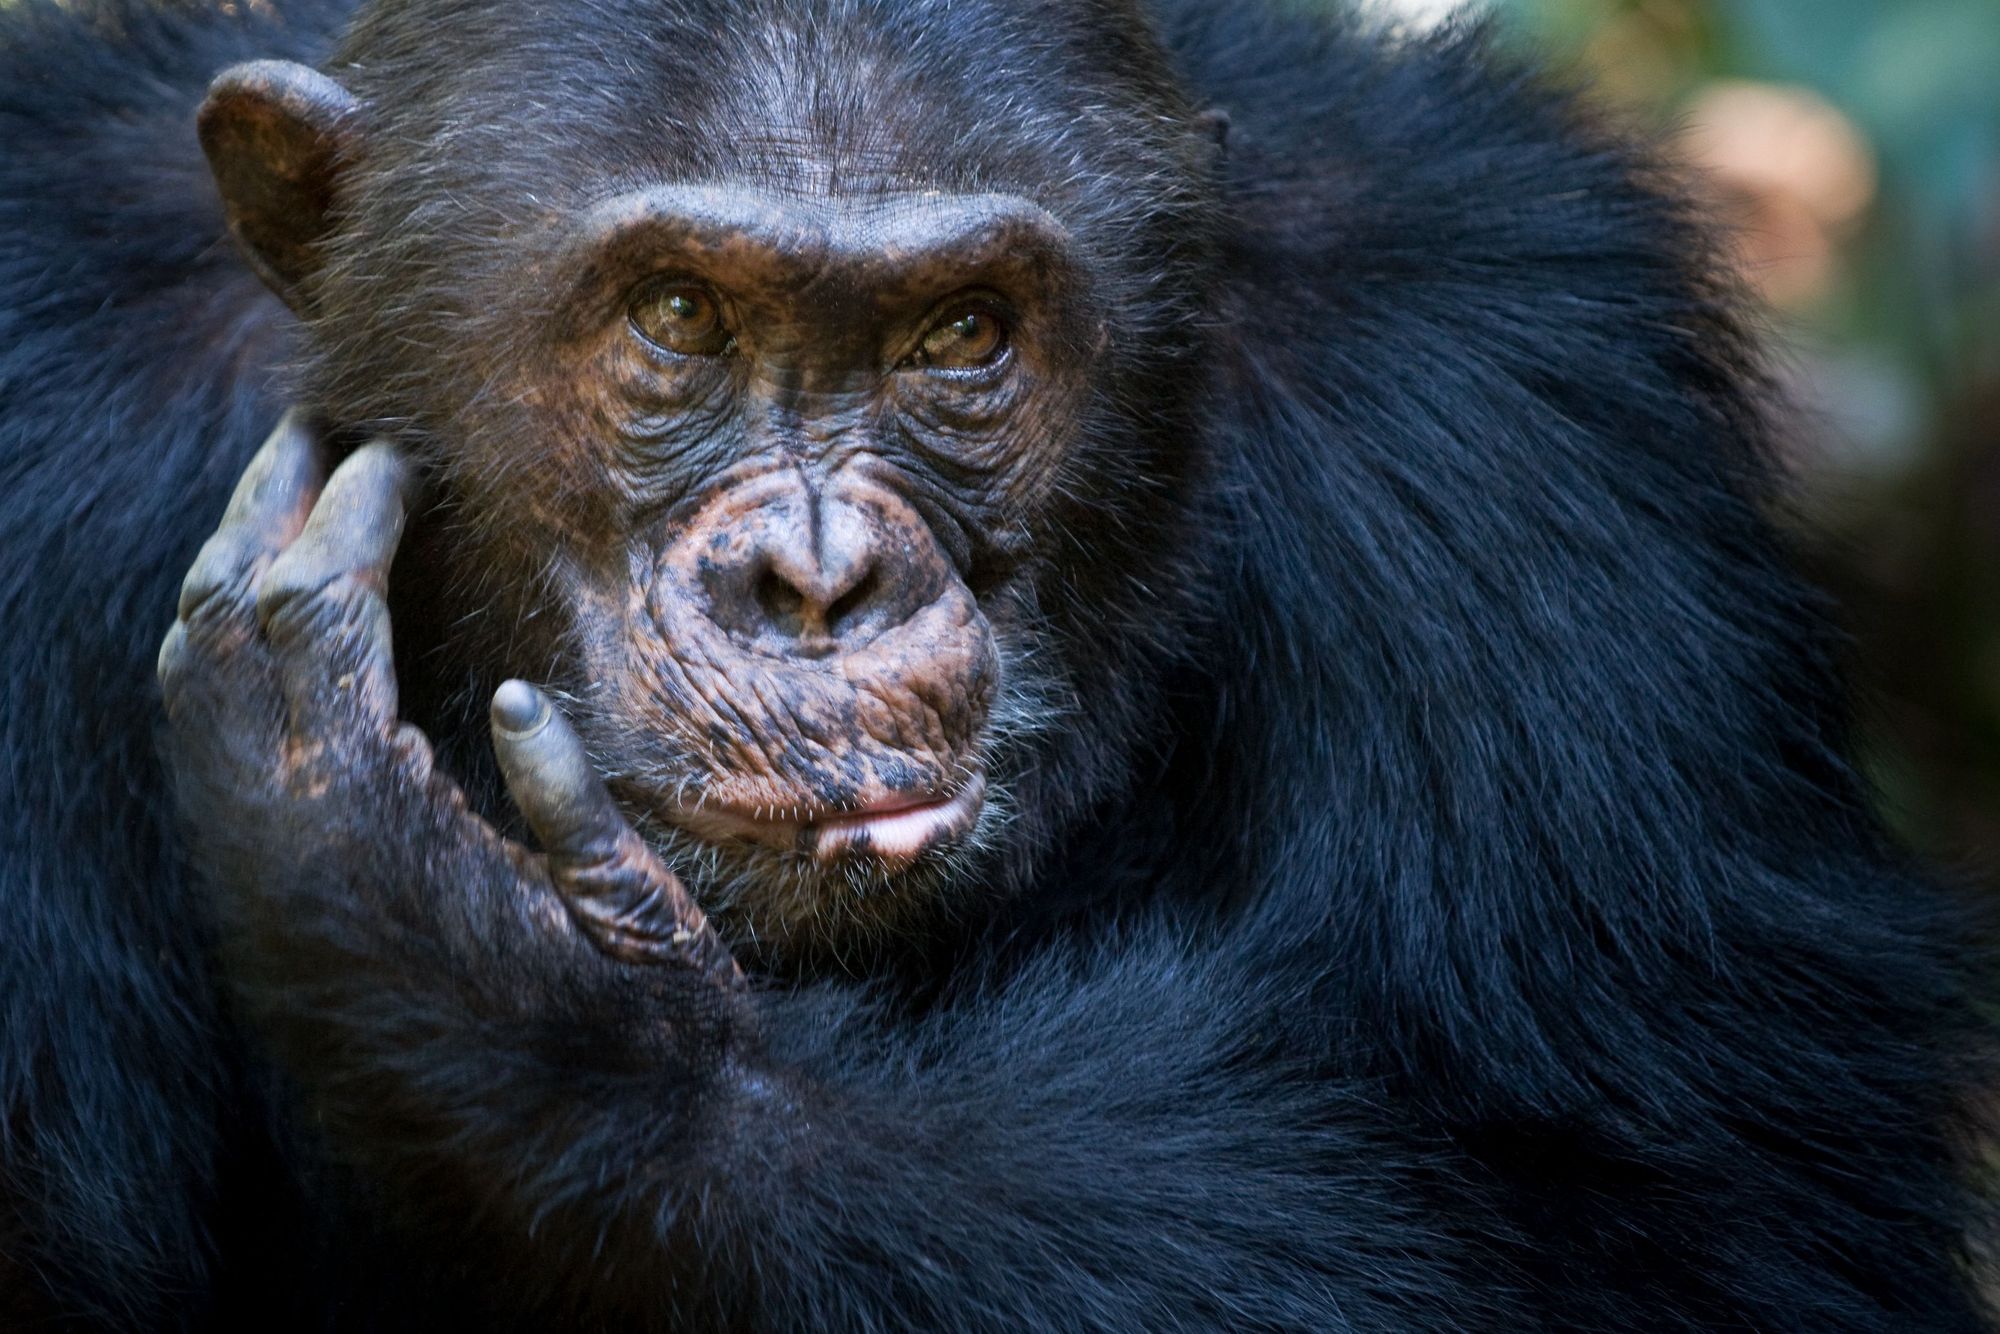 The largest colony of eastern chimpanzees in the world can be found in Mahale Mountains National Park. Photo: Getty